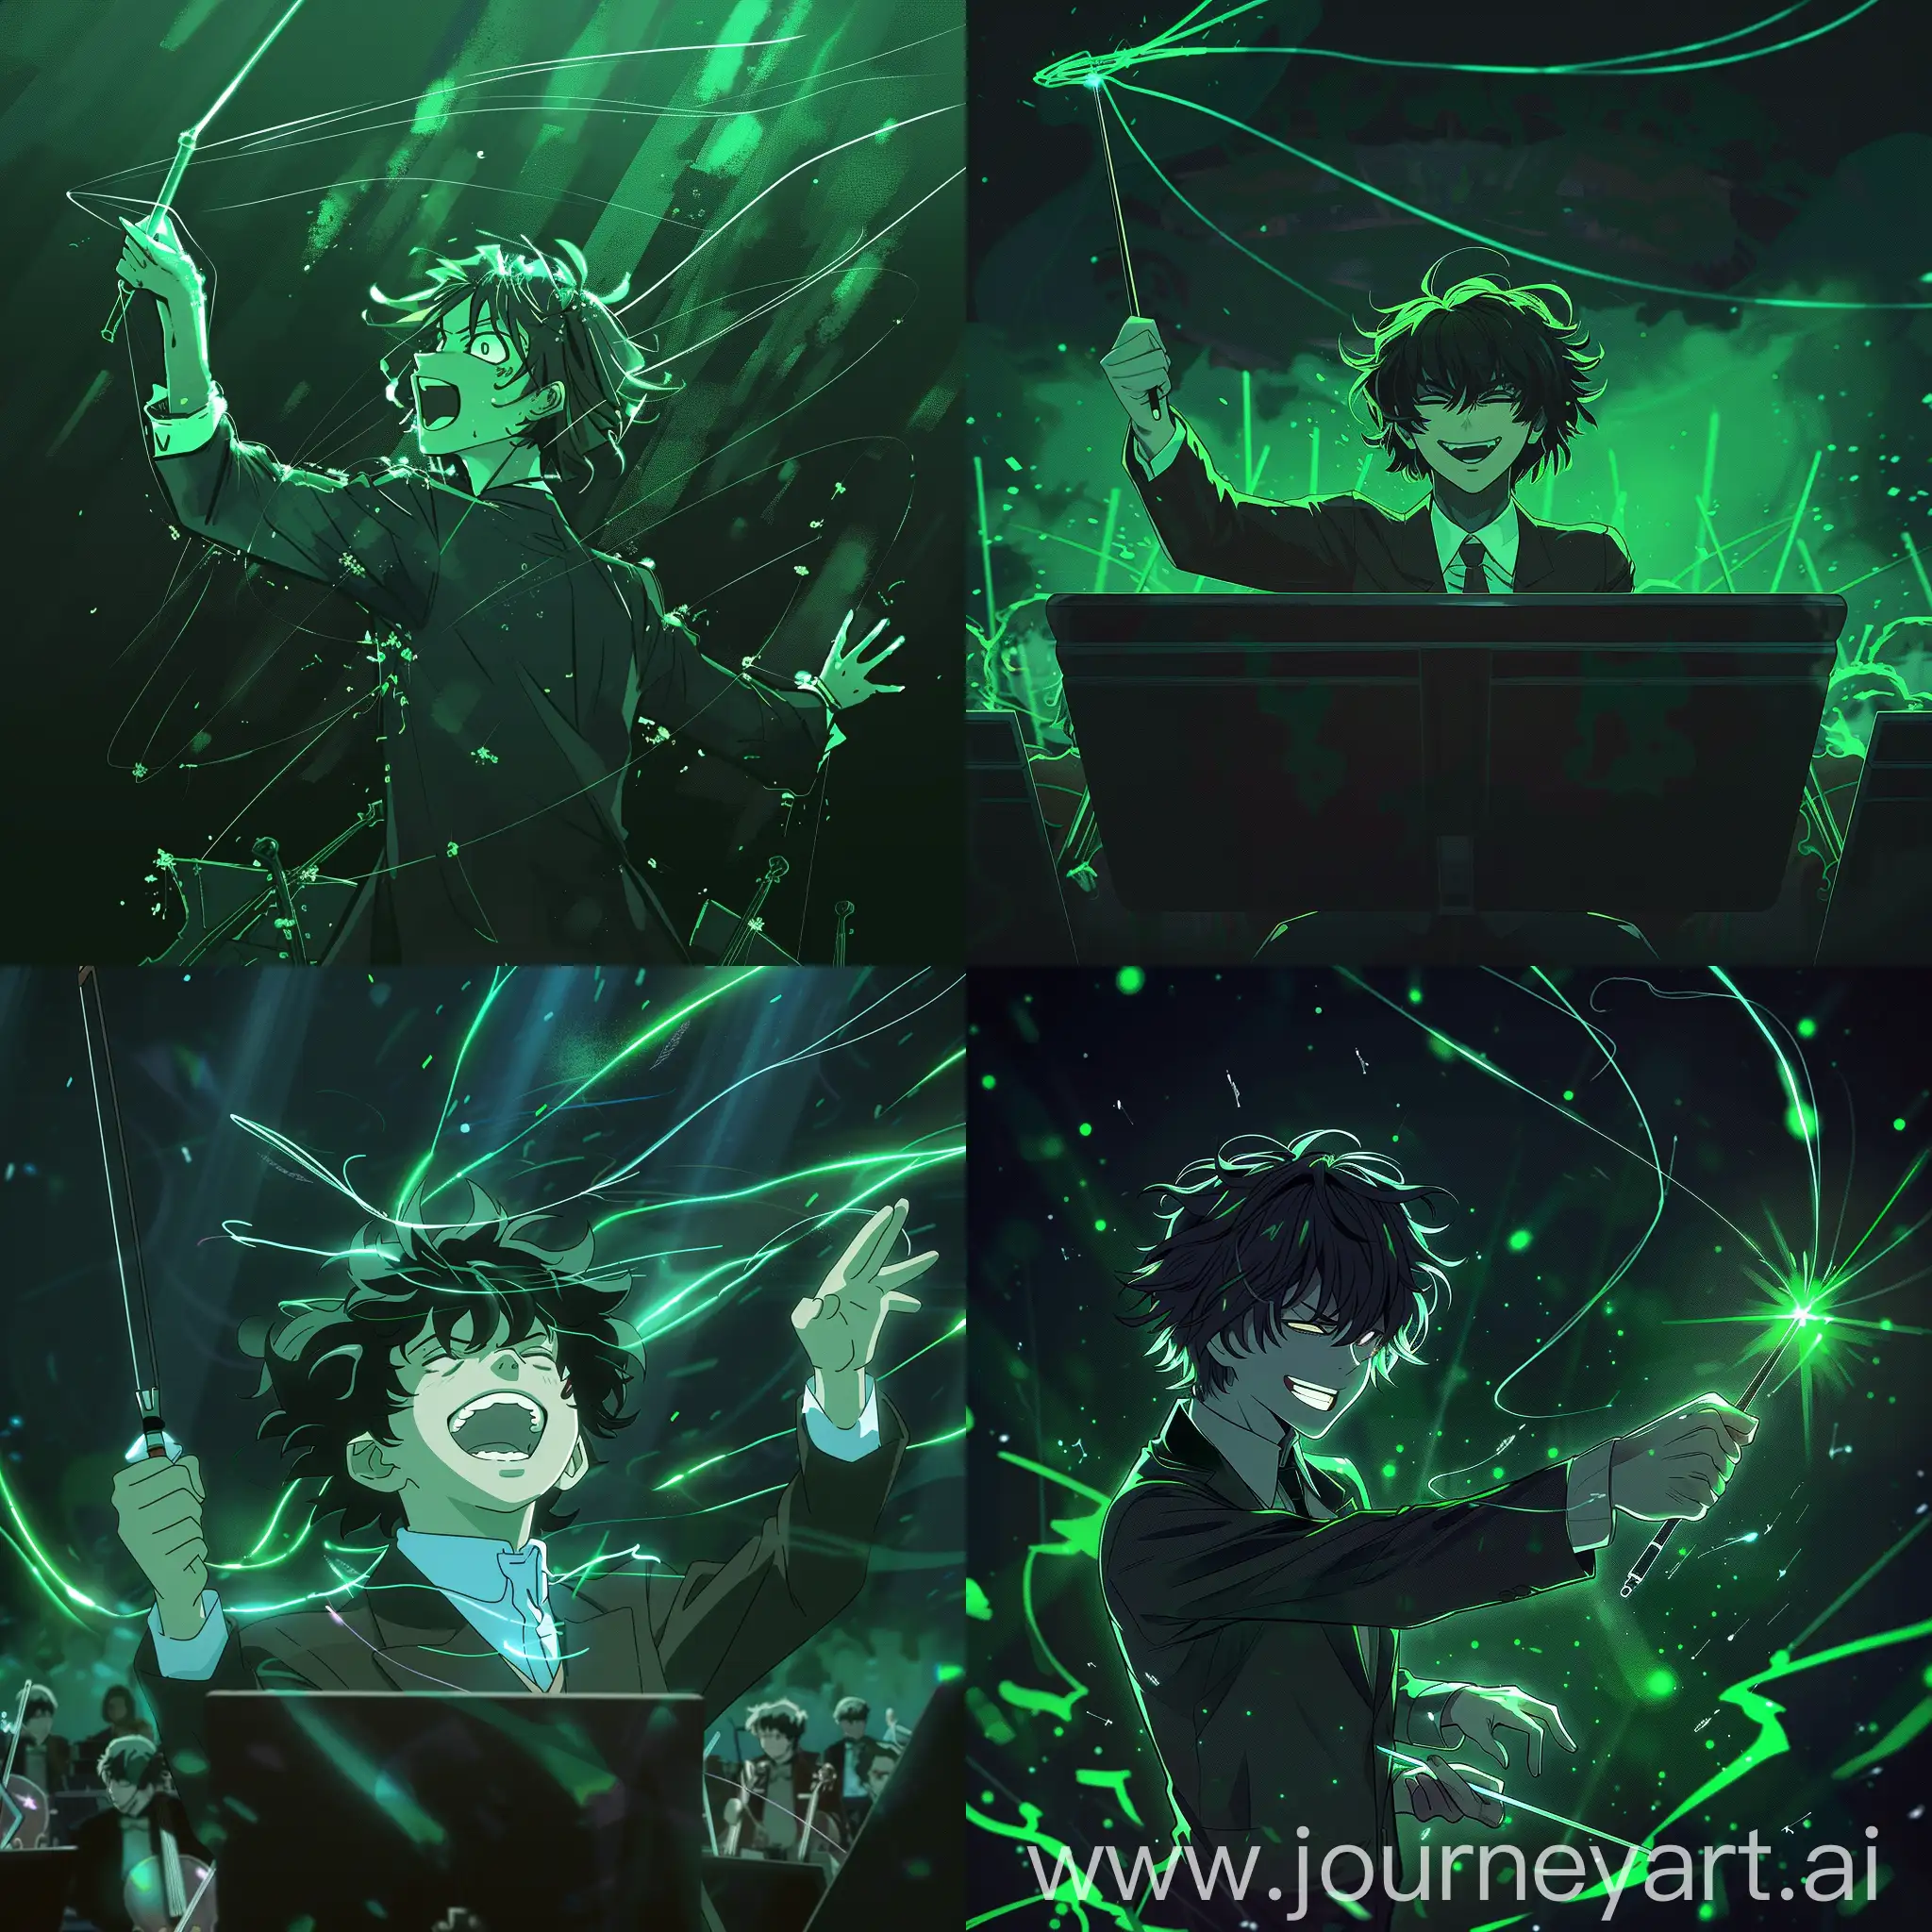 The conductor is a young guy who does not control the orchestra, but the feelings of people. The orchestra is conducted by a conductor. The orchestra sits drooping. Transparent threads should come from the wand. The emotion of the conductor: obsession and madness with an evil grin. Anime style with elements of realism.  Green lighting should fall on the conductor. The conductor is worth 3/4. The conductor is a psychopath who likes to manipulate